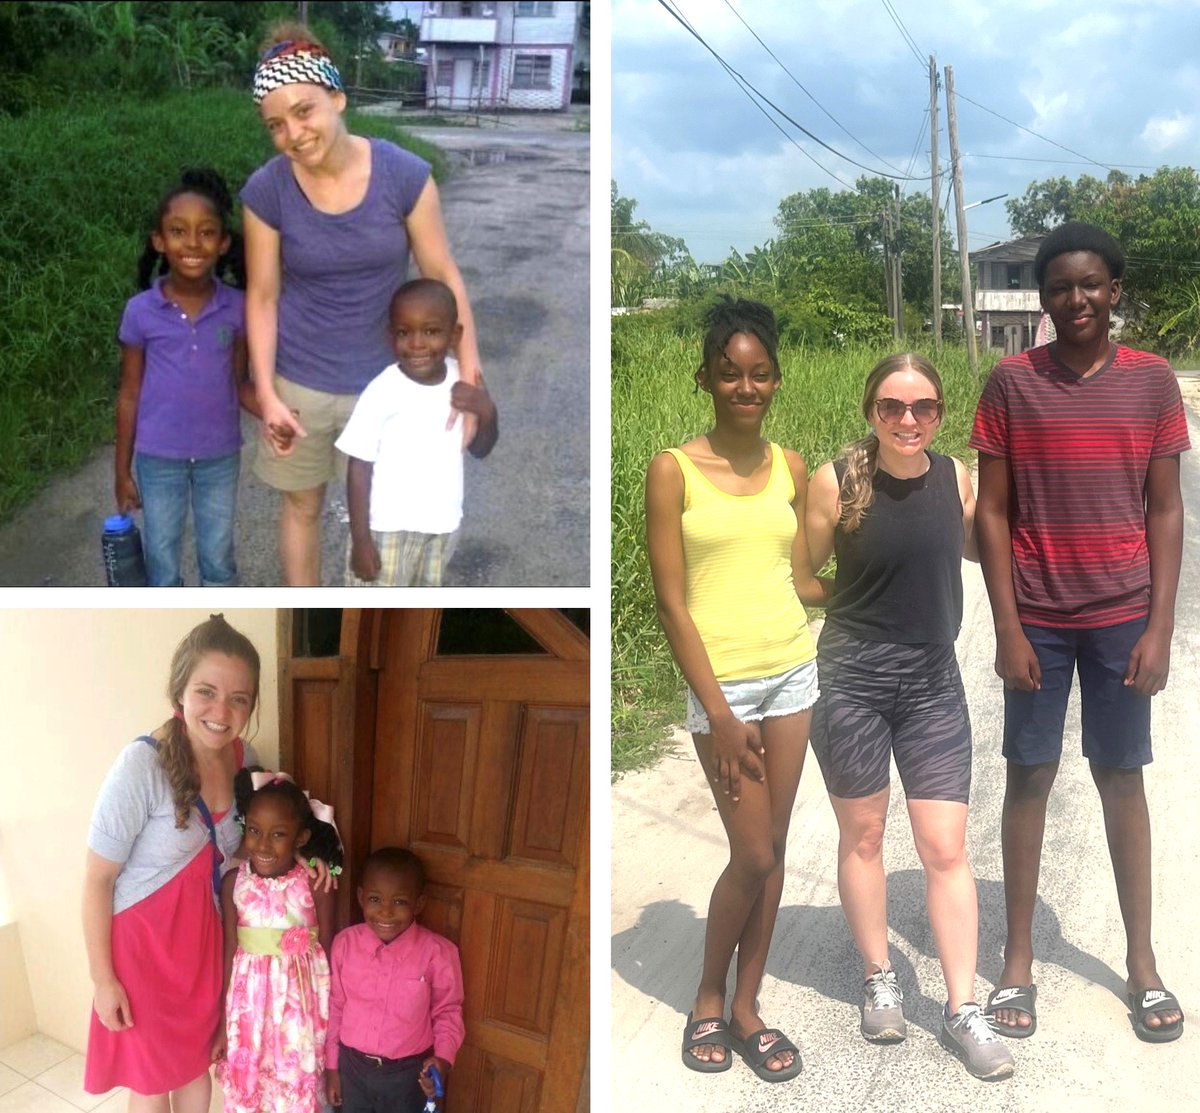 '10 years later, and my host siblings are not so little anymore!'
- Retuned #PeaceCorps Volunteer Kaylee
#Service #TBT #Community 🇬🇾